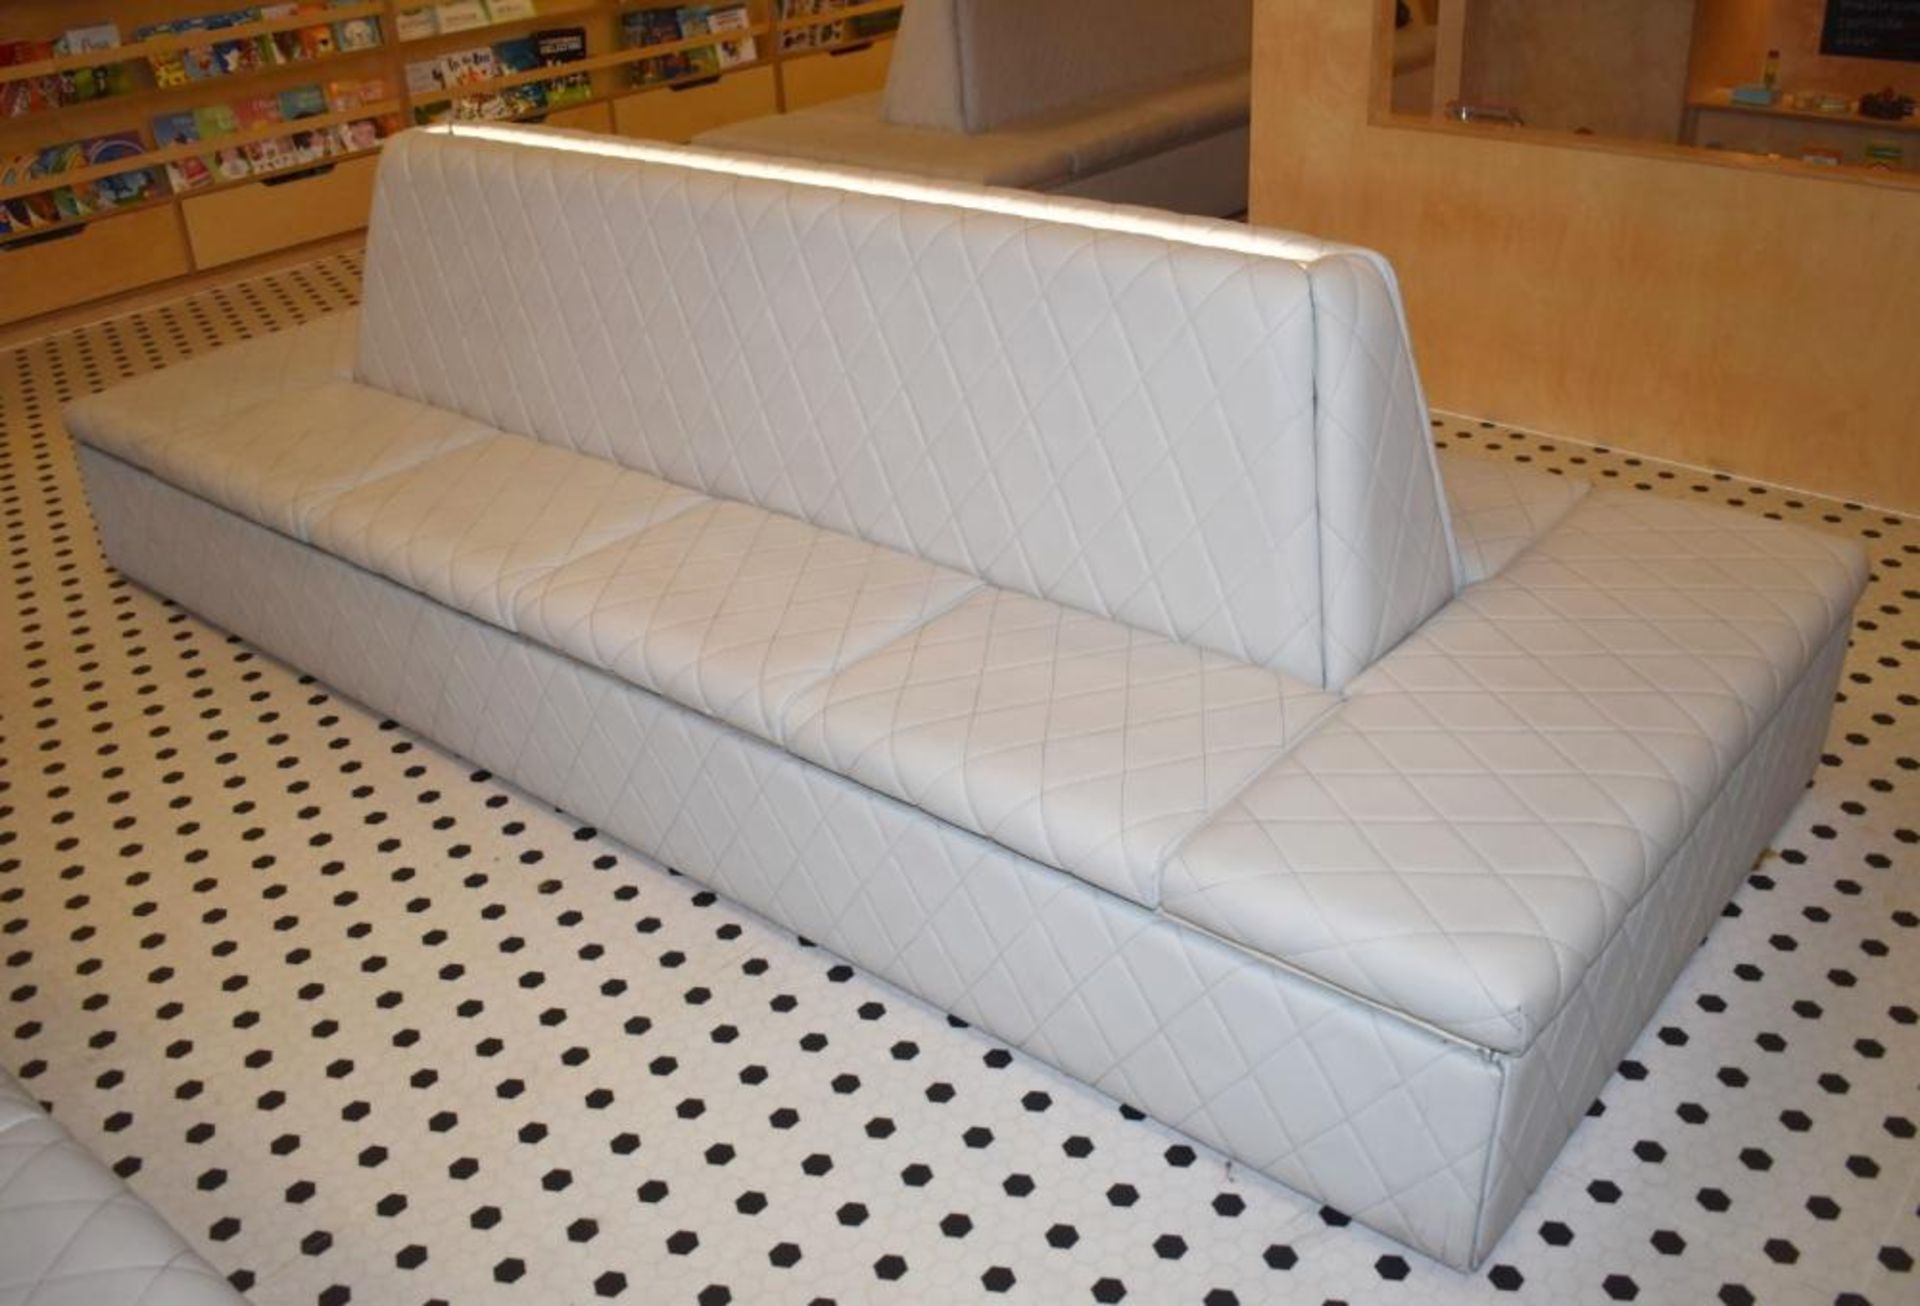 1 x Central Seating Banquette in a Contemporary Diamond Faux Grey Leather - Quality Craftsmanship